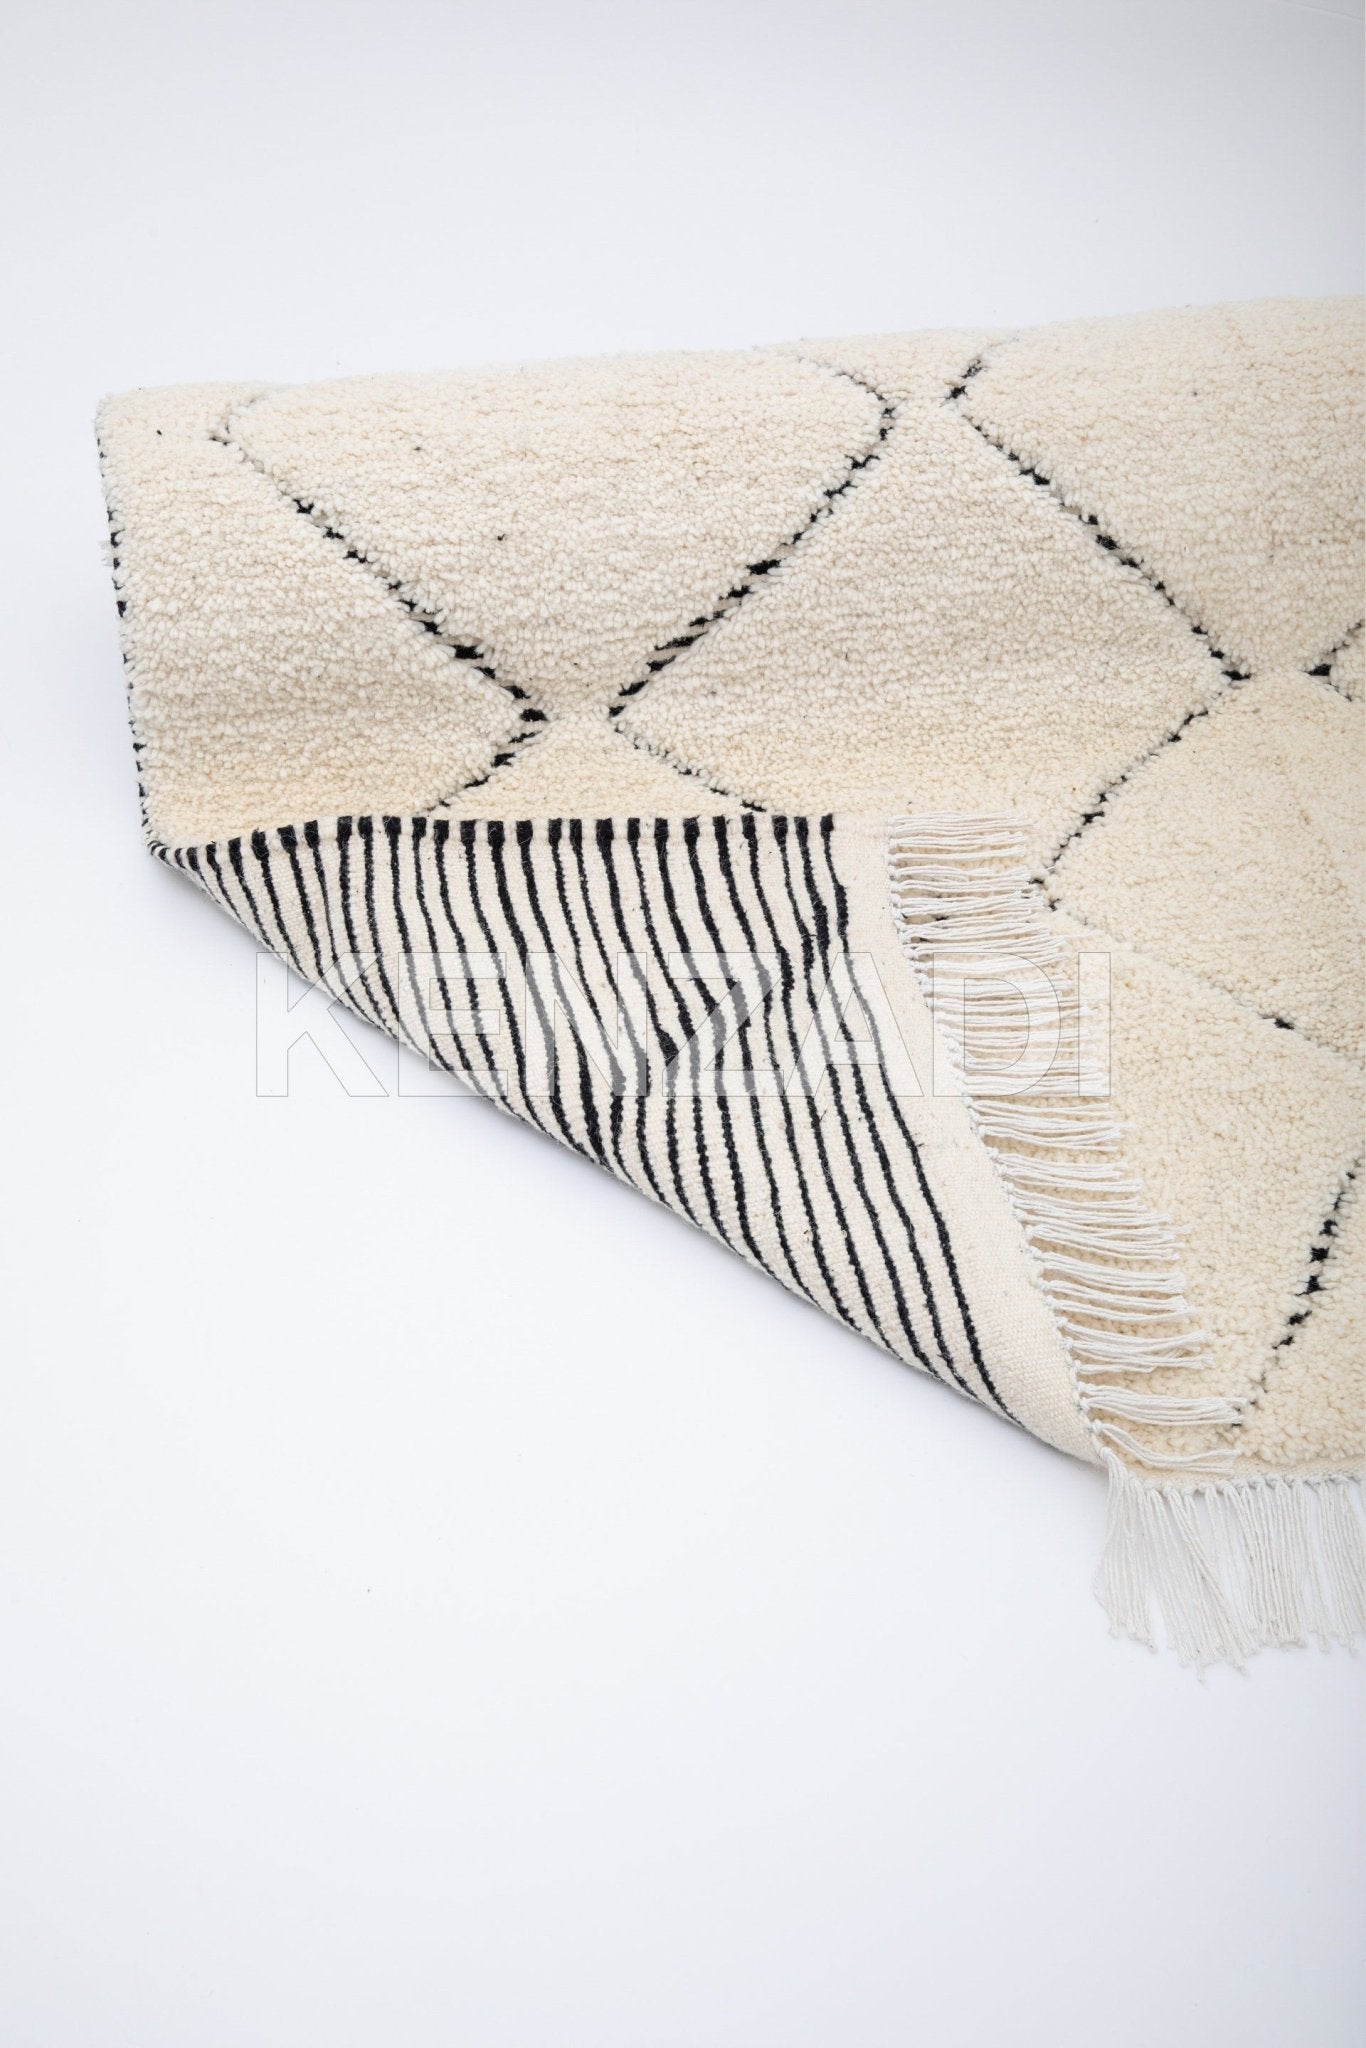 Handcrafted Beni Ouarain Rug: 6x10 feet Classic Moroccan White Wool with Geometric Patterns - Ethically Made by Berber Artisans - Handmade by My Poufs